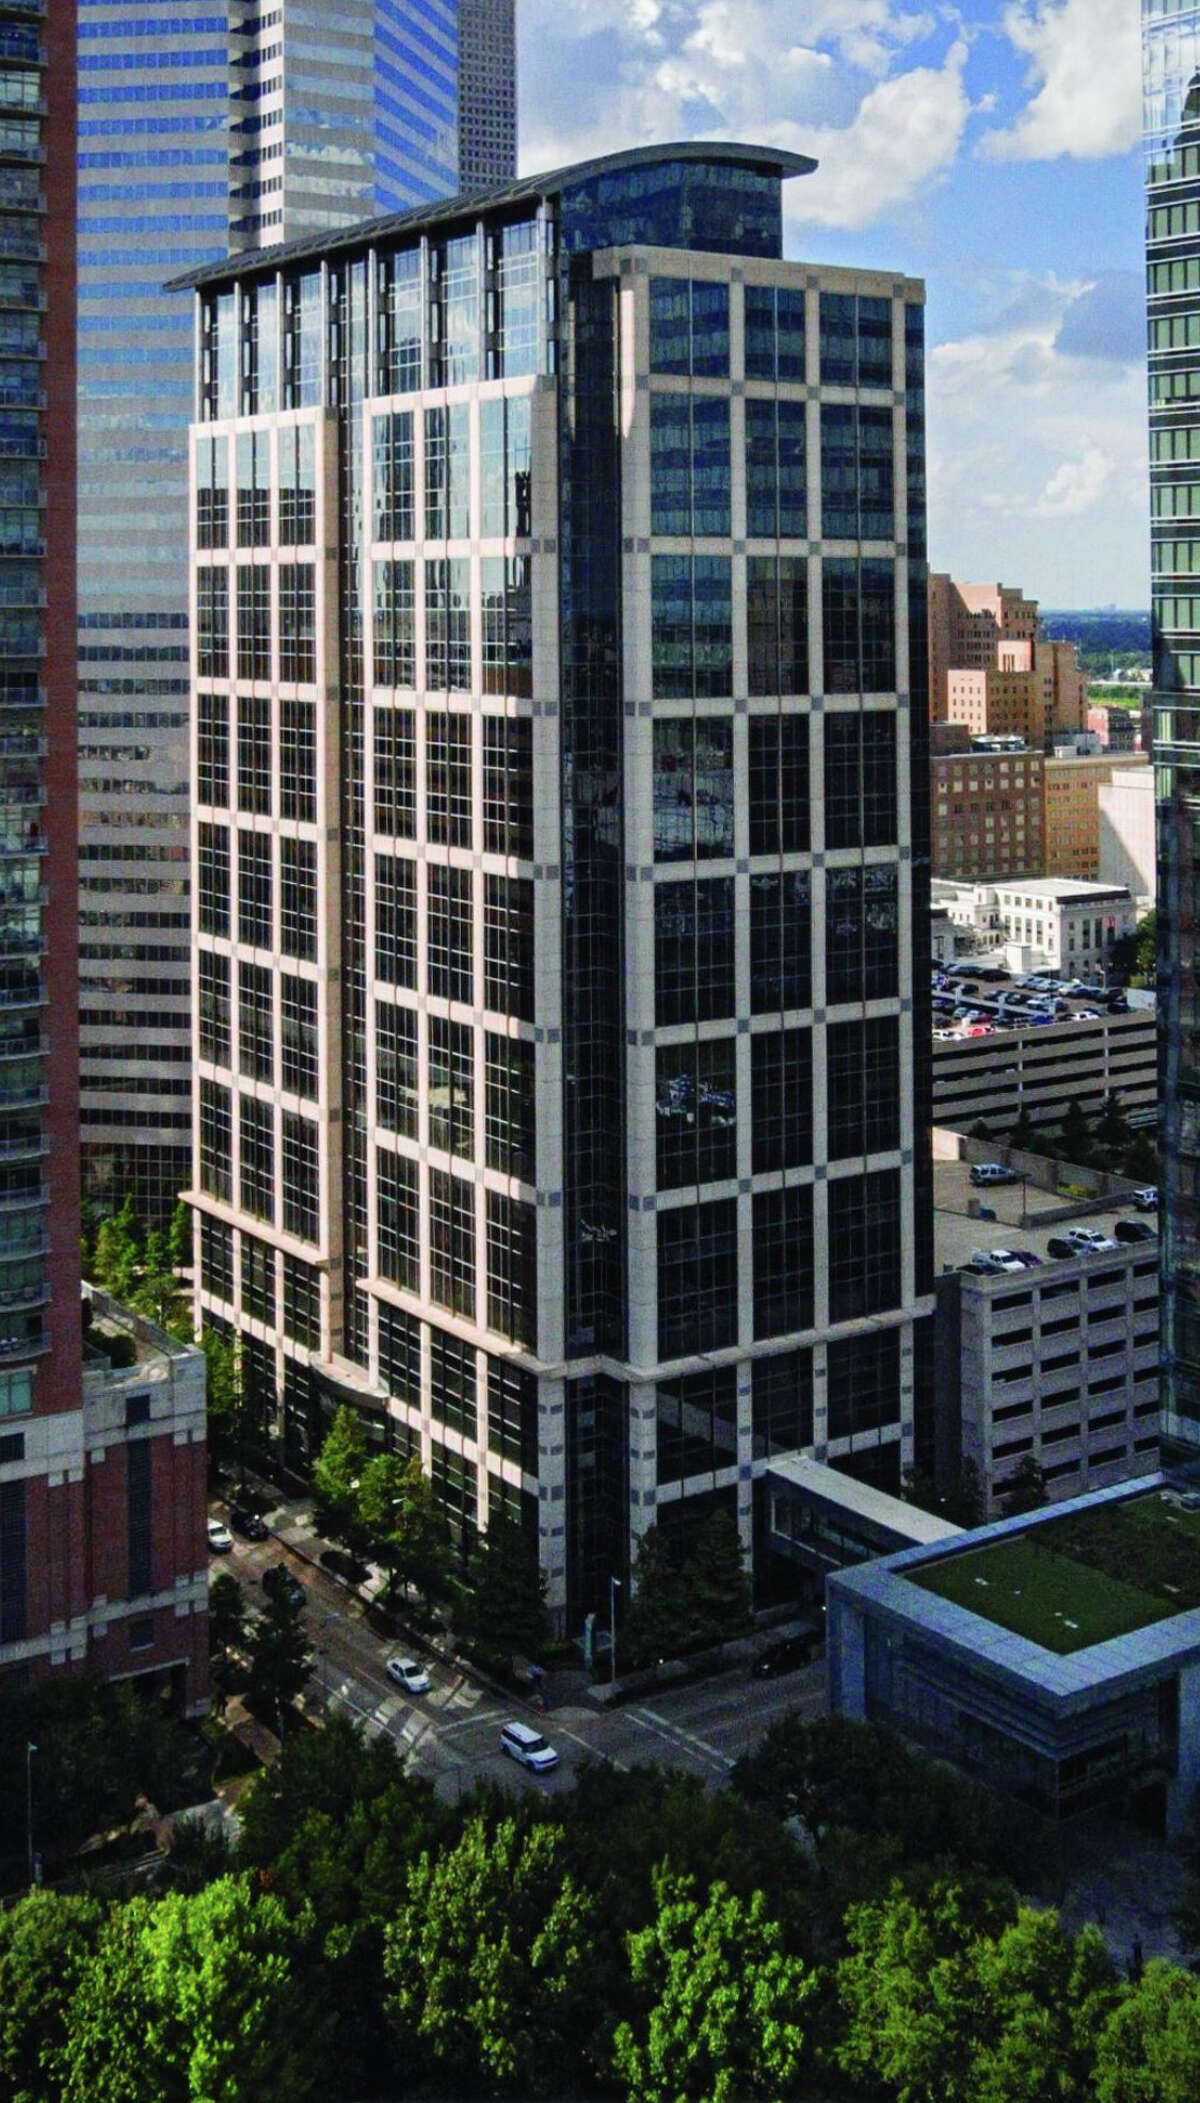  Jackson Walker has leased 77,015 square feet at 5 Houston Center, located at 1401 McKinney, Transwestern announced.